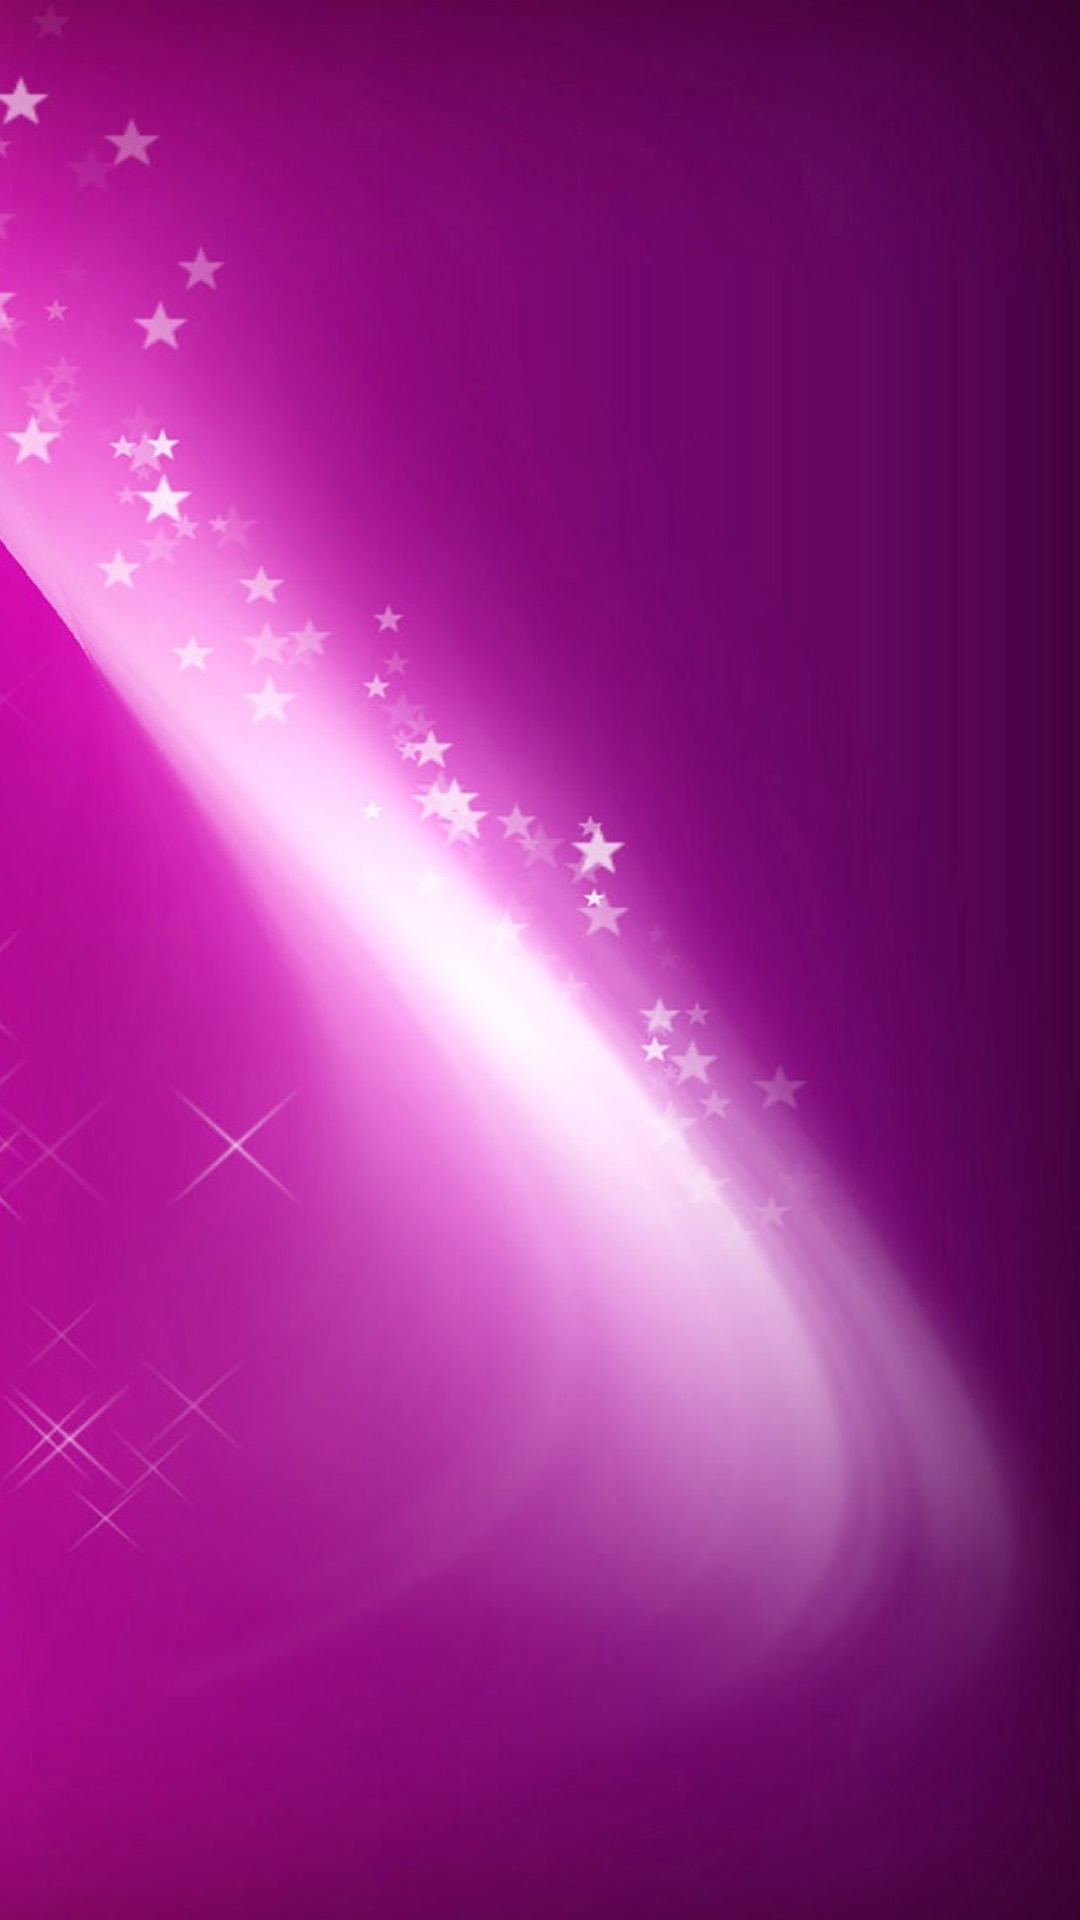 Pink Glow Abstract Galaxy S4 Wallpaper